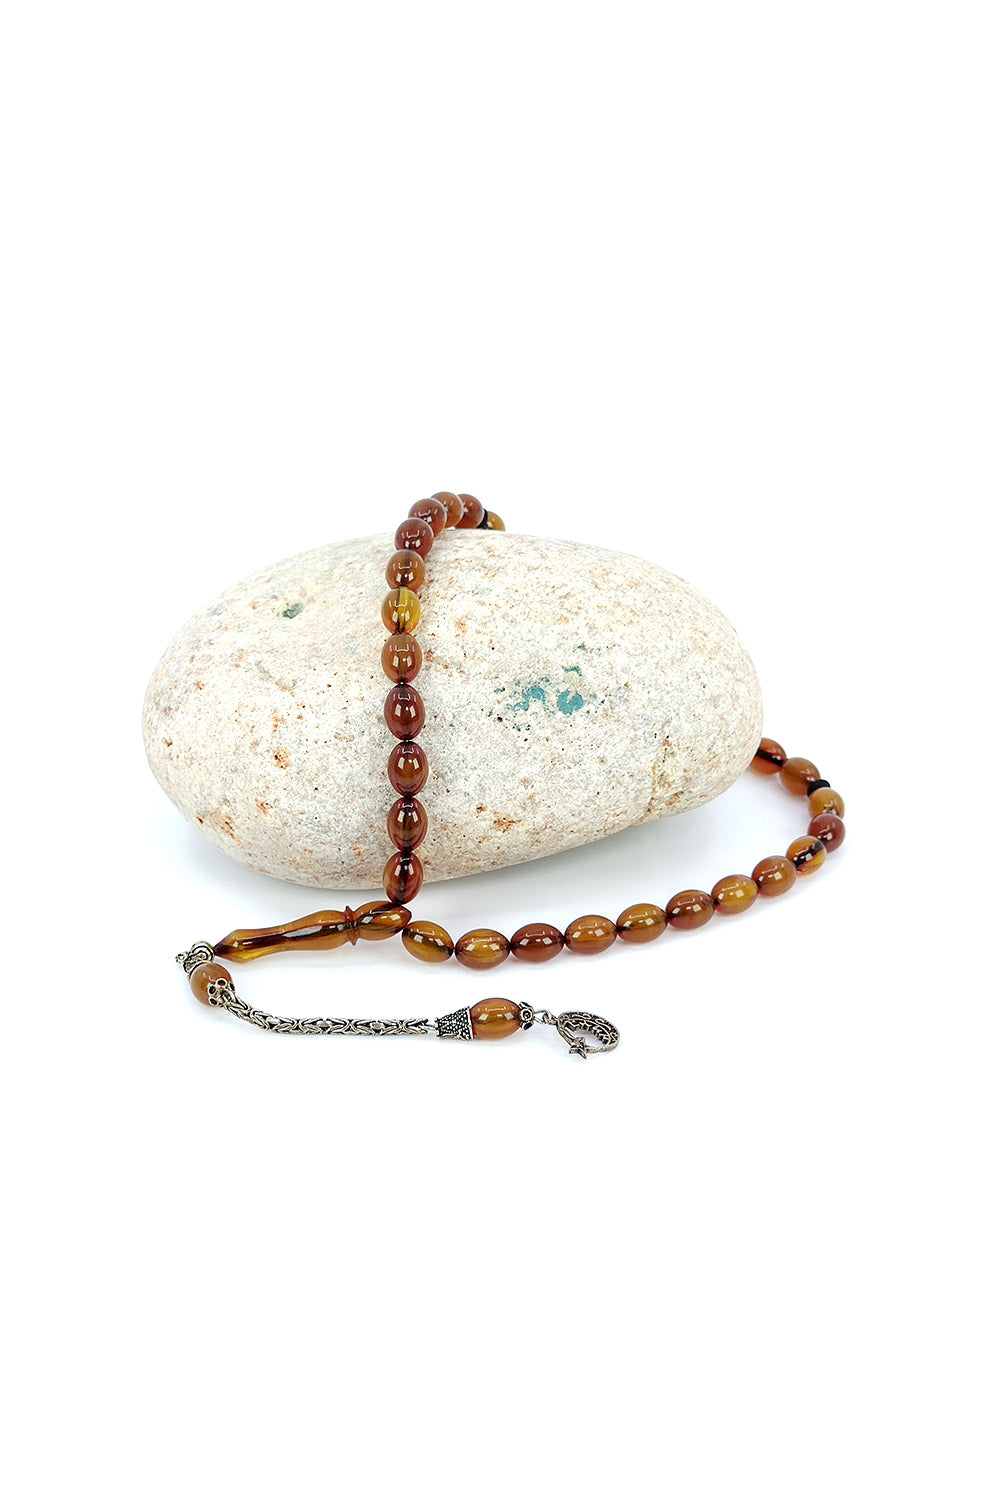 Ve Tesbih Solid Amber Prayer Beads with Silver Tassels 3